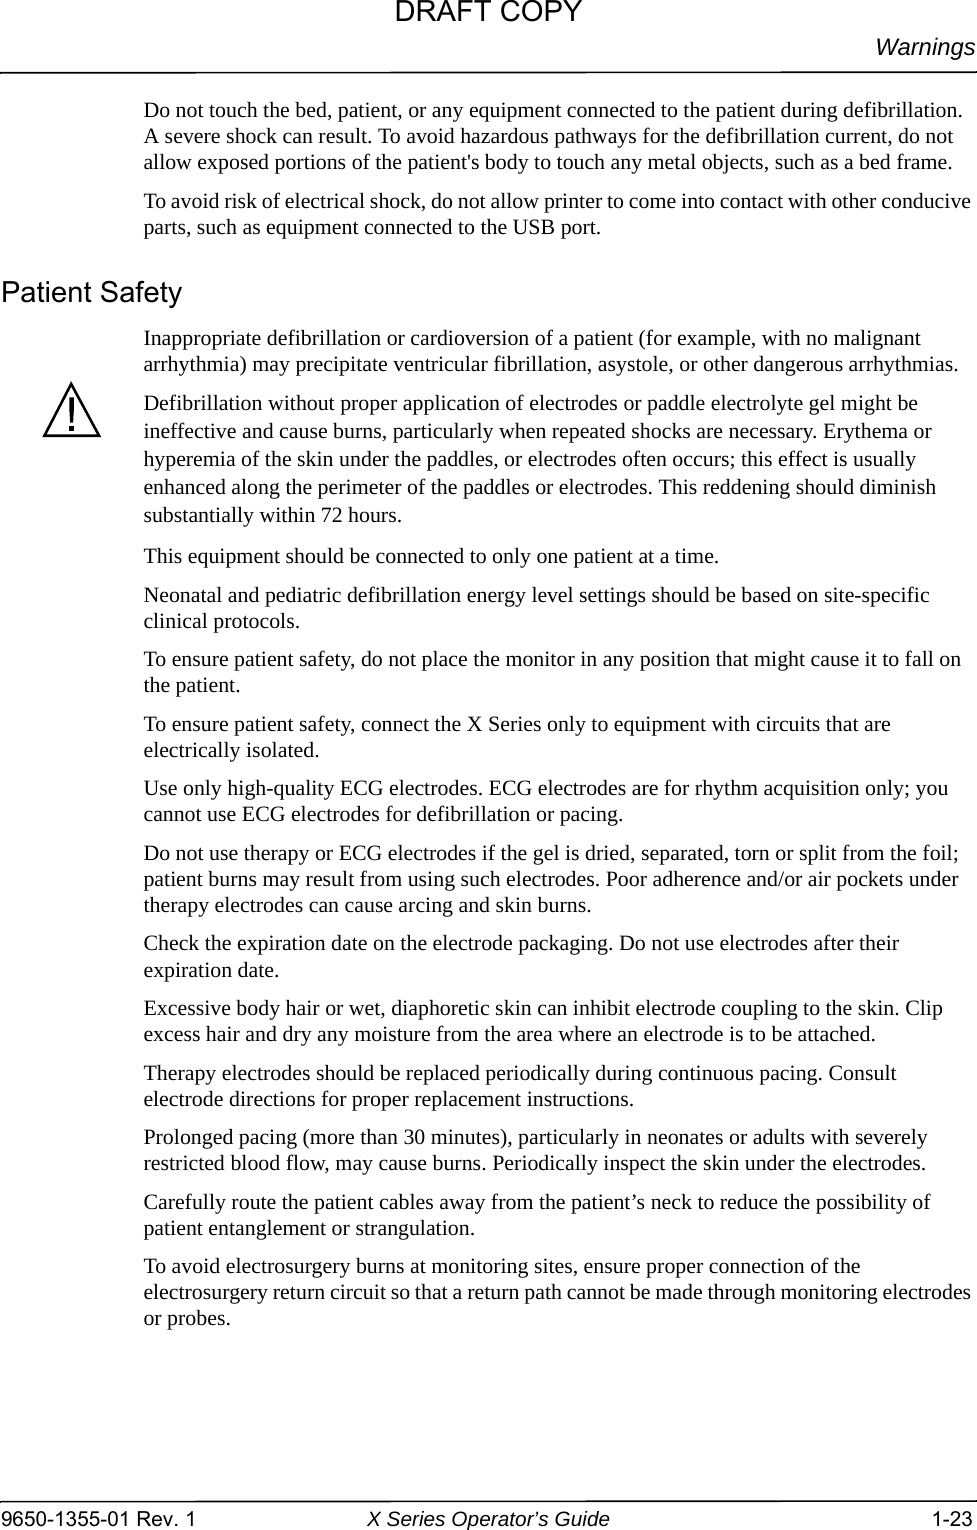 Warnings9650-1355-01 Rev. 1 X Series Operator’s Guide 1-23Do not touch the bed, patient, or any equipment connected to the patient during defibrillation. A severe shock can result. To avoid hazardous pathways for the defibrillation current, do not allow exposed portions of the patient&apos;s body to touch any metal objects, such as a bed frame.To avoid risk of electrical shock, do not allow printer to come into contact with other conducive parts, such as equipment connected to the USB port.Patient SafetyInappropriate defibrillation or cardioversion of a patient (for example, with no malignant arrhythmia) may precipitate ventricular fibrillation, asystole, or other dangerous arrhythmias.Defibrillation without proper application of electrodes or paddle electrolyte gel might be ineffective and cause burns, particularly when repeated shocks are necessary. Erythema or hyperemia of the skin under the paddles, or electrodes often occurs; this effect is usually enhanced along the perimeter of the paddles or electrodes. This reddening should diminish substantially within 72 hours.This equipment should be connected to only one patient at a time.Neonatal and pediatric defibrillation energy level settings should be based on site-specific clinical protocols.To ensure patient safety, do not place the monitor in any position that might cause it to fall on the patient.To ensure patient safety, connect the X Series only to equipment with circuits that are electrically isolated.Use only high-quality ECG electrodes. ECG electrodes are for rhythm acquisition only; you cannot use ECG electrodes for defibrillation or pacing.Do not use therapy or ECG electrodes if the gel is dried, separated, torn or split from the foil; patient burns may result from using such electrodes. Poor adherence and/or air pockets under therapy electrodes can cause arcing and skin burns.Check the expiration date on the electrode packaging. Do not use electrodes after their expiration date.Excessive body hair or wet, diaphoretic skin can inhibit electrode coupling to the skin. Clip excess hair and dry any moisture from the area where an electrode is to be attached.Therapy electrodes should be replaced periodically during continuous pacing. Consult electrode directions for proper replacement instructions.Prolonged pacing (more than 30 minutes), particularly in neonates or adults with severely restricted blood flow, may cause burns. Periodically inspect the skin under the electrodes.Carefully route the patient cables away from the patient’s neck to reduce the possibility of patient entanglement or strangulation.To avoid electrosurgery burns at monitoring sites, ensure proper connection of the electrosurgery return circuit so that a return path cannot be made through monitoring electrodes or probes.DRAFT COPY